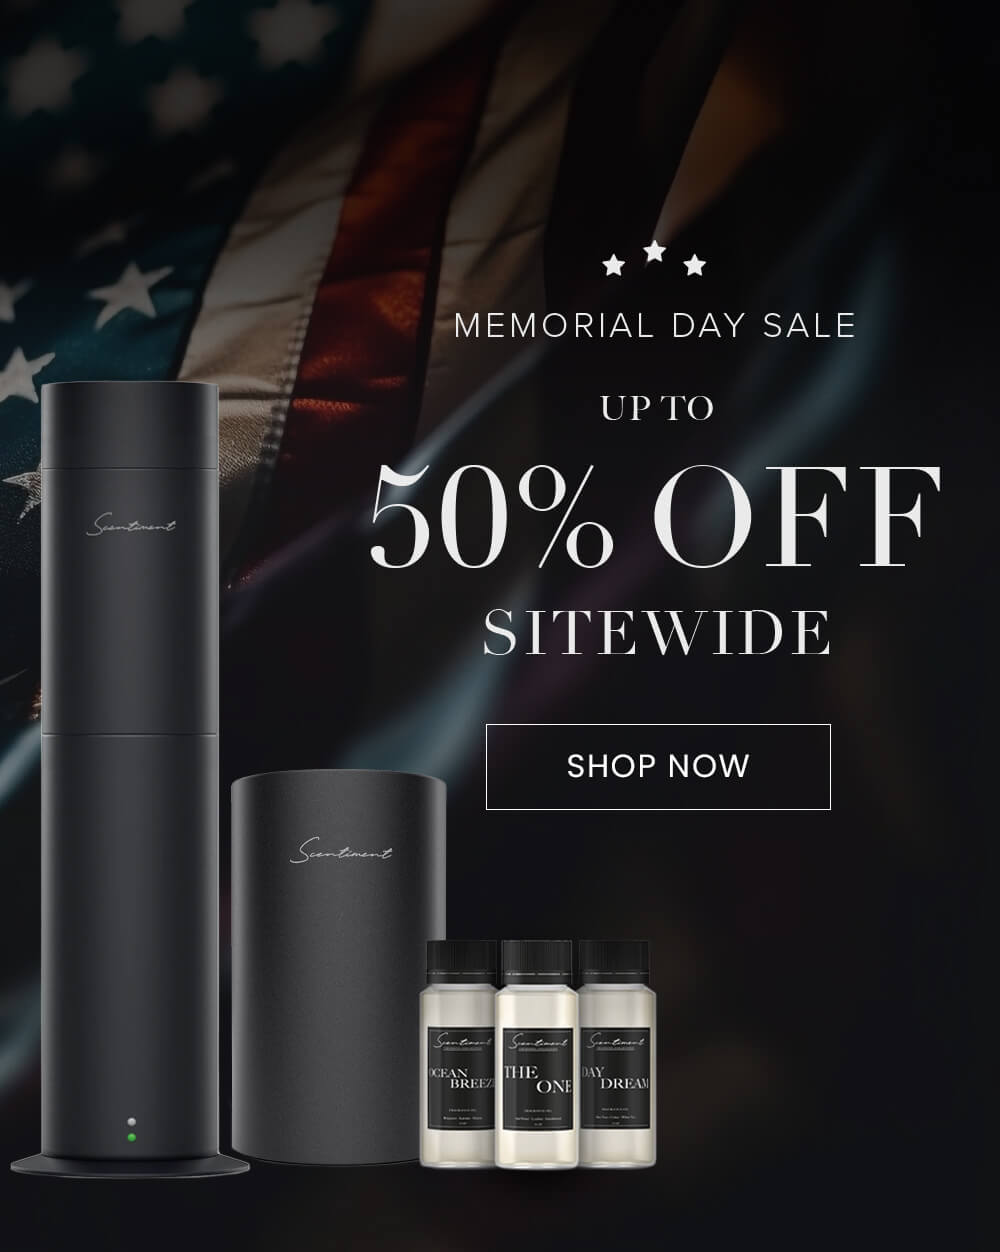 Memorial Day Sale: Up to 50% Sitewide! Click here to Shop Now!